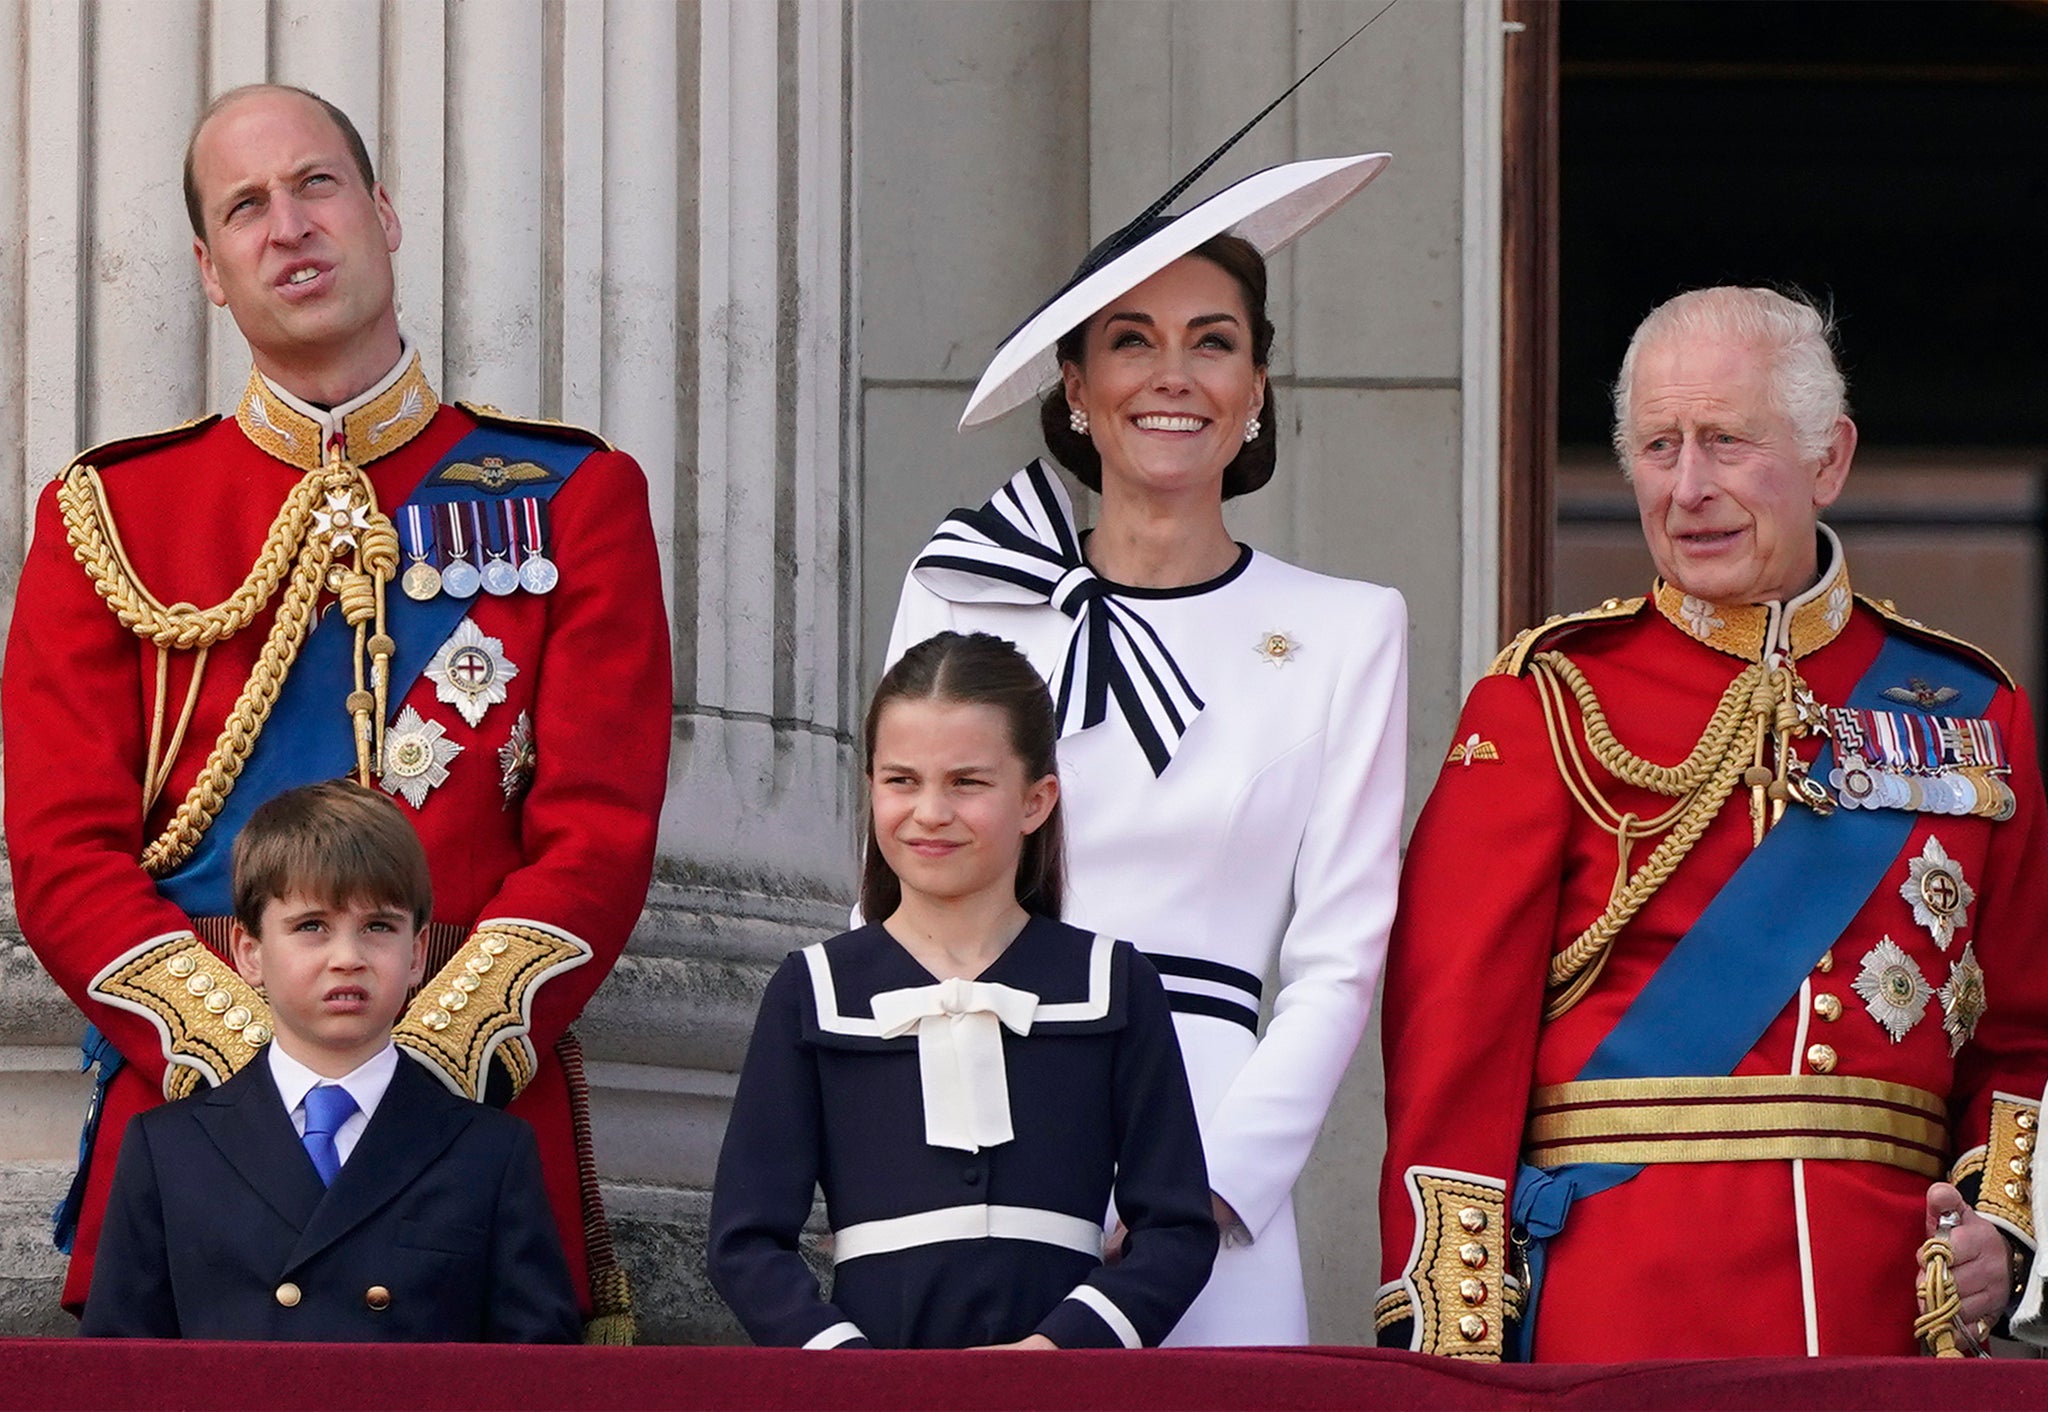 Father and son 40 years later on the balcony of Buckingham Palace for Trooping the Colour